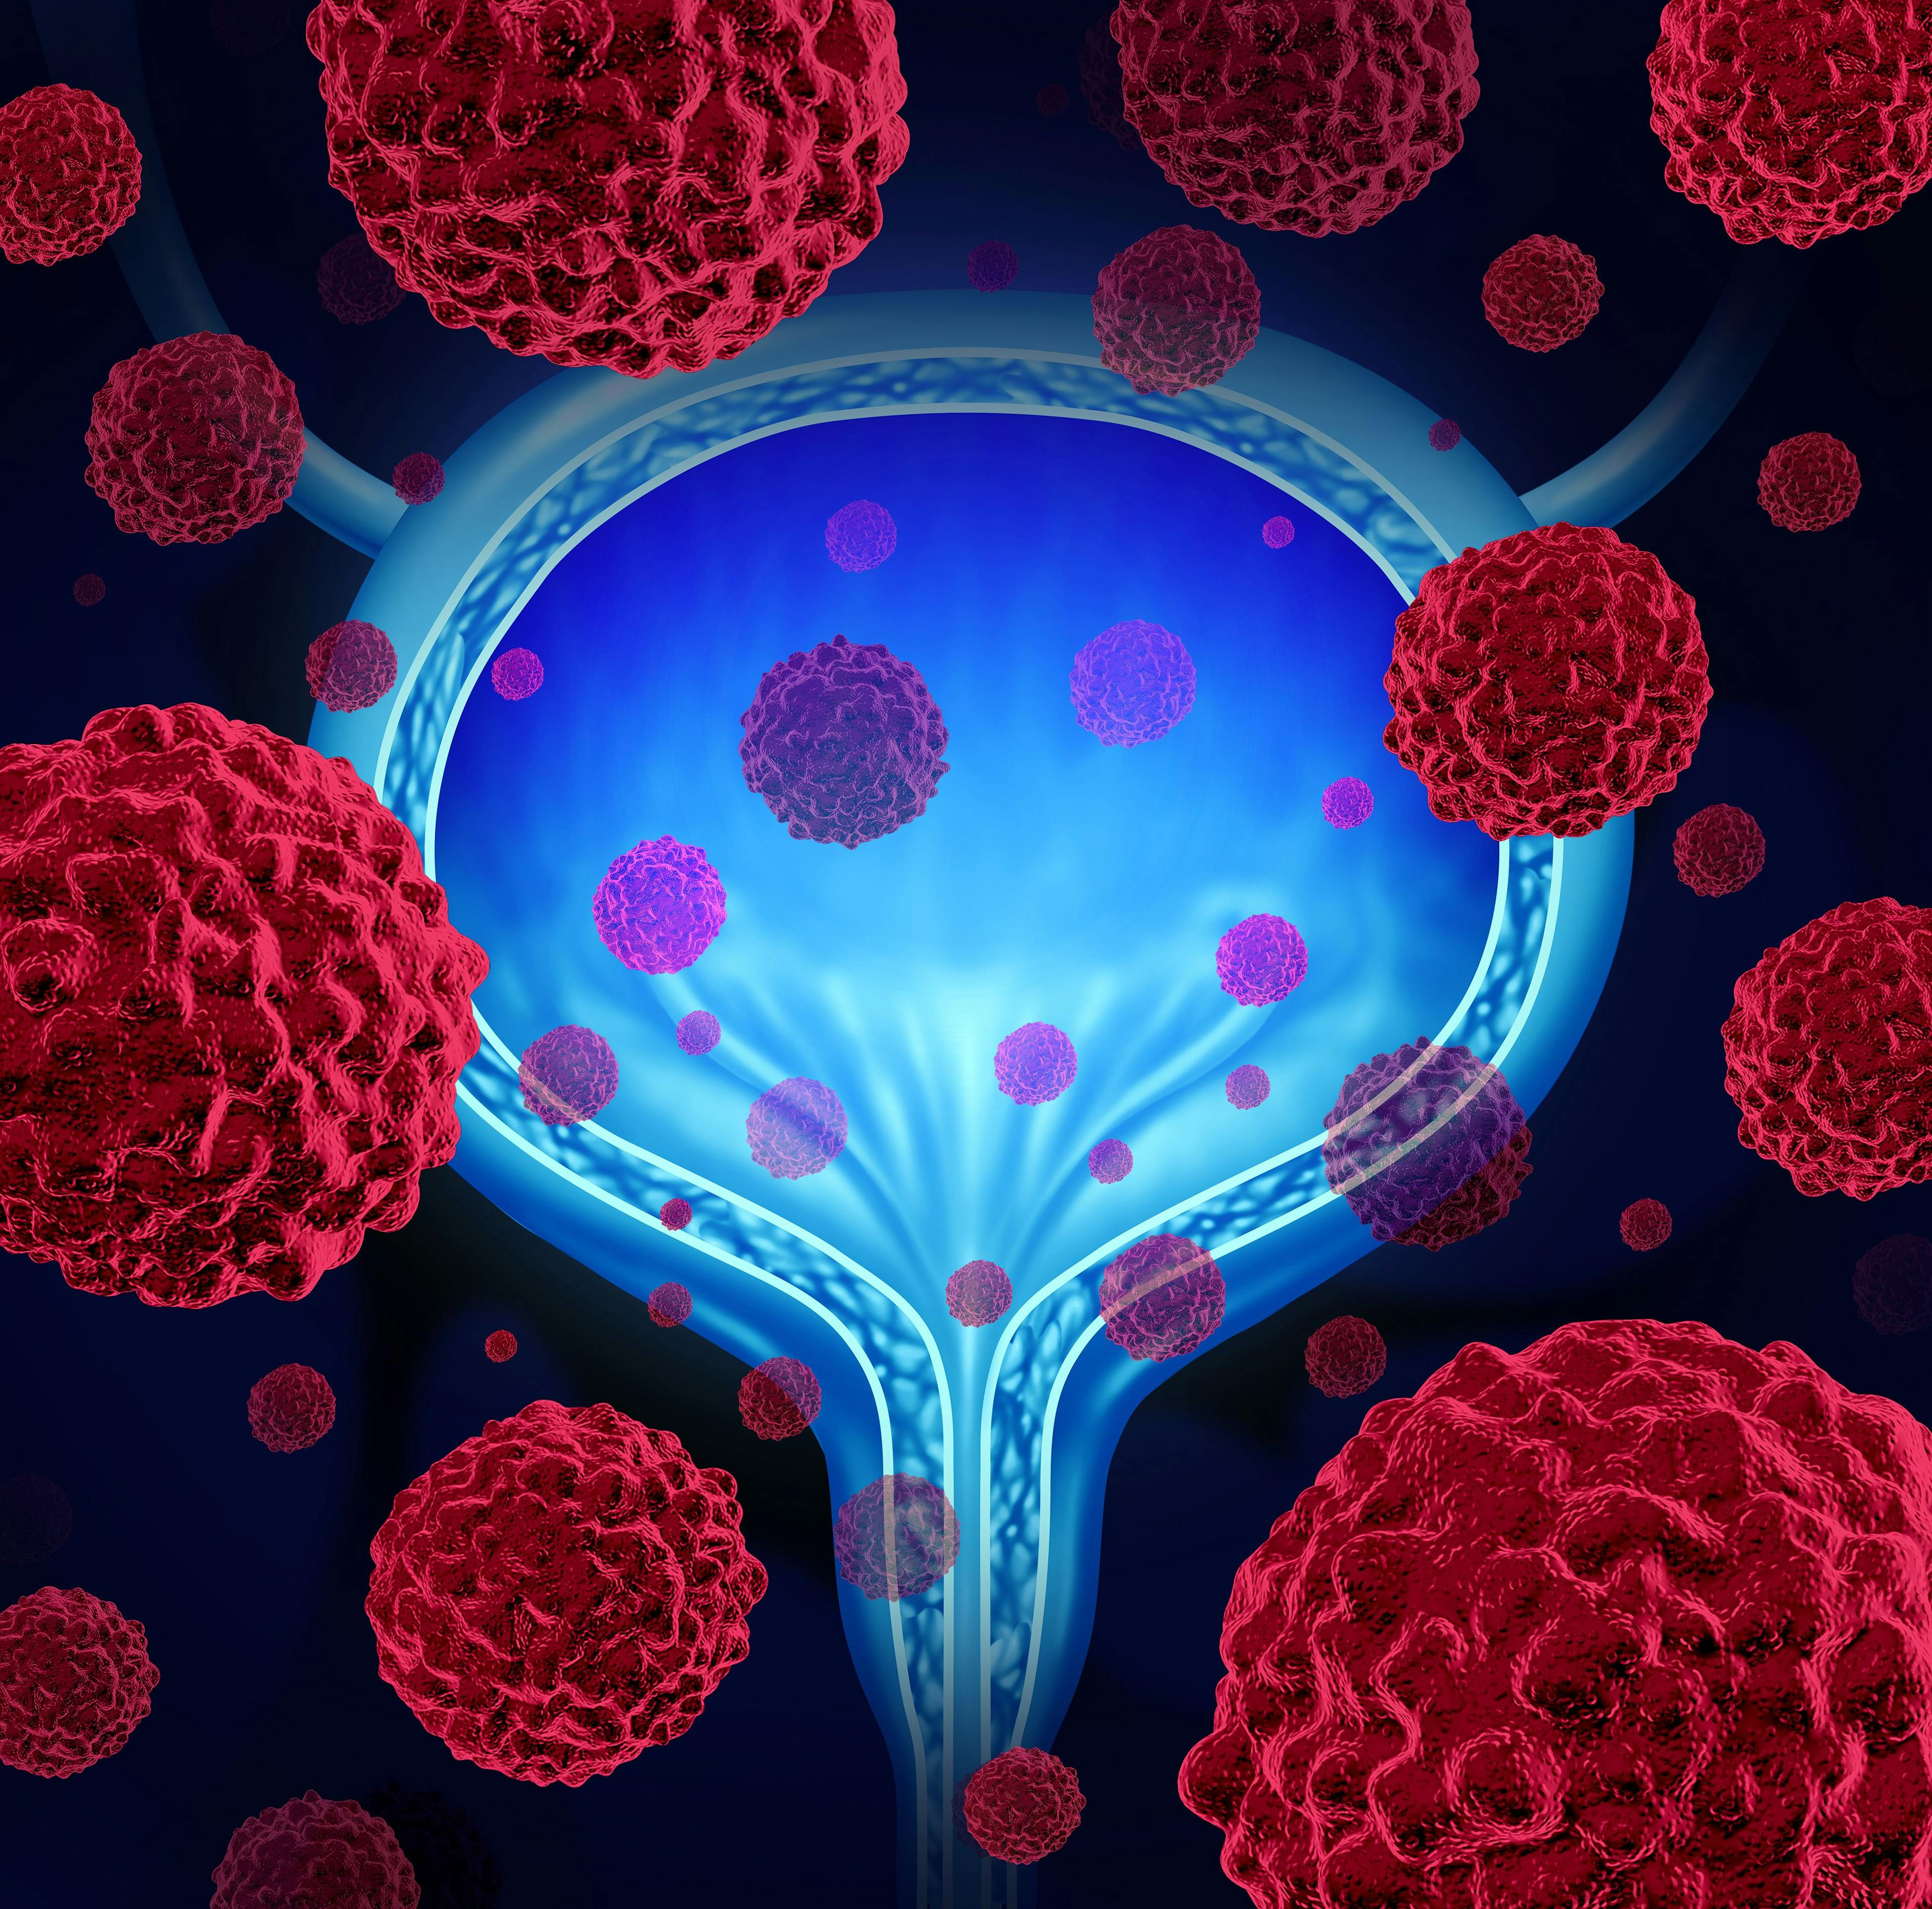 Frontline Therapy of Avelumab Showed Favorable OS Benefit in Japanese Patients With Advanced Urothelial Cancer